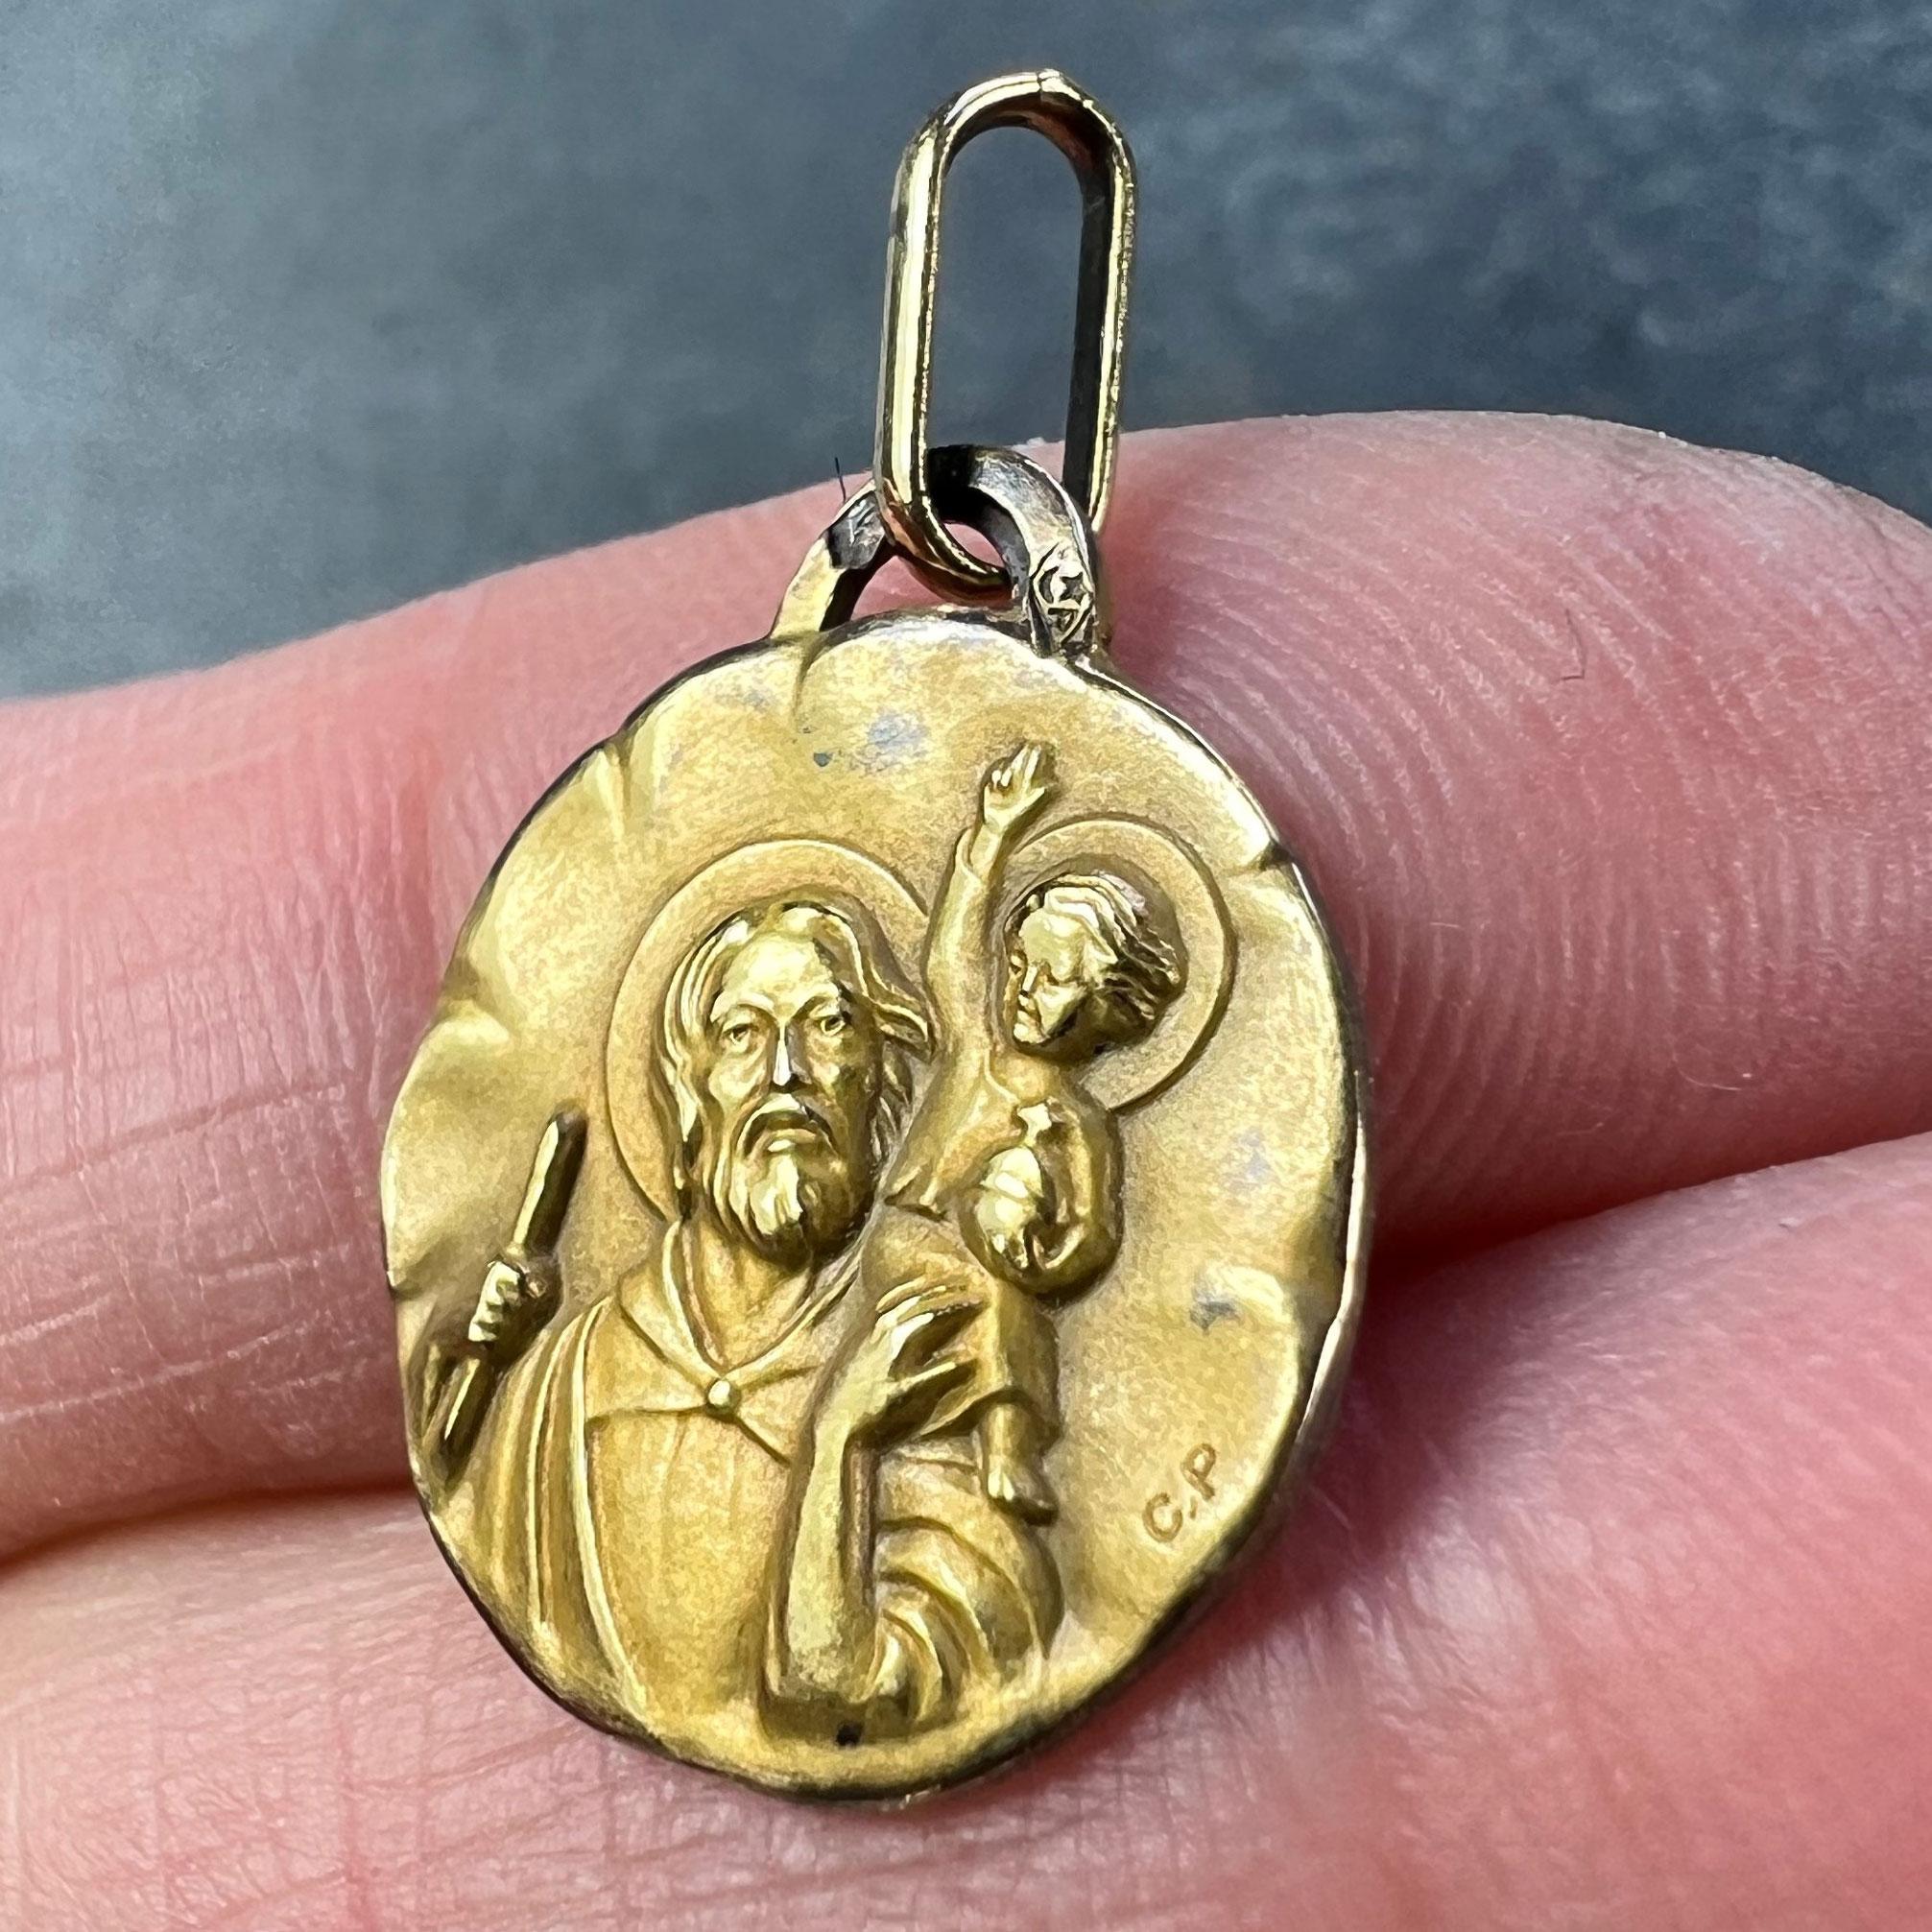 French Perroud Saint Christopher 18K Yellow Gold Medal Pendant For Sale 2